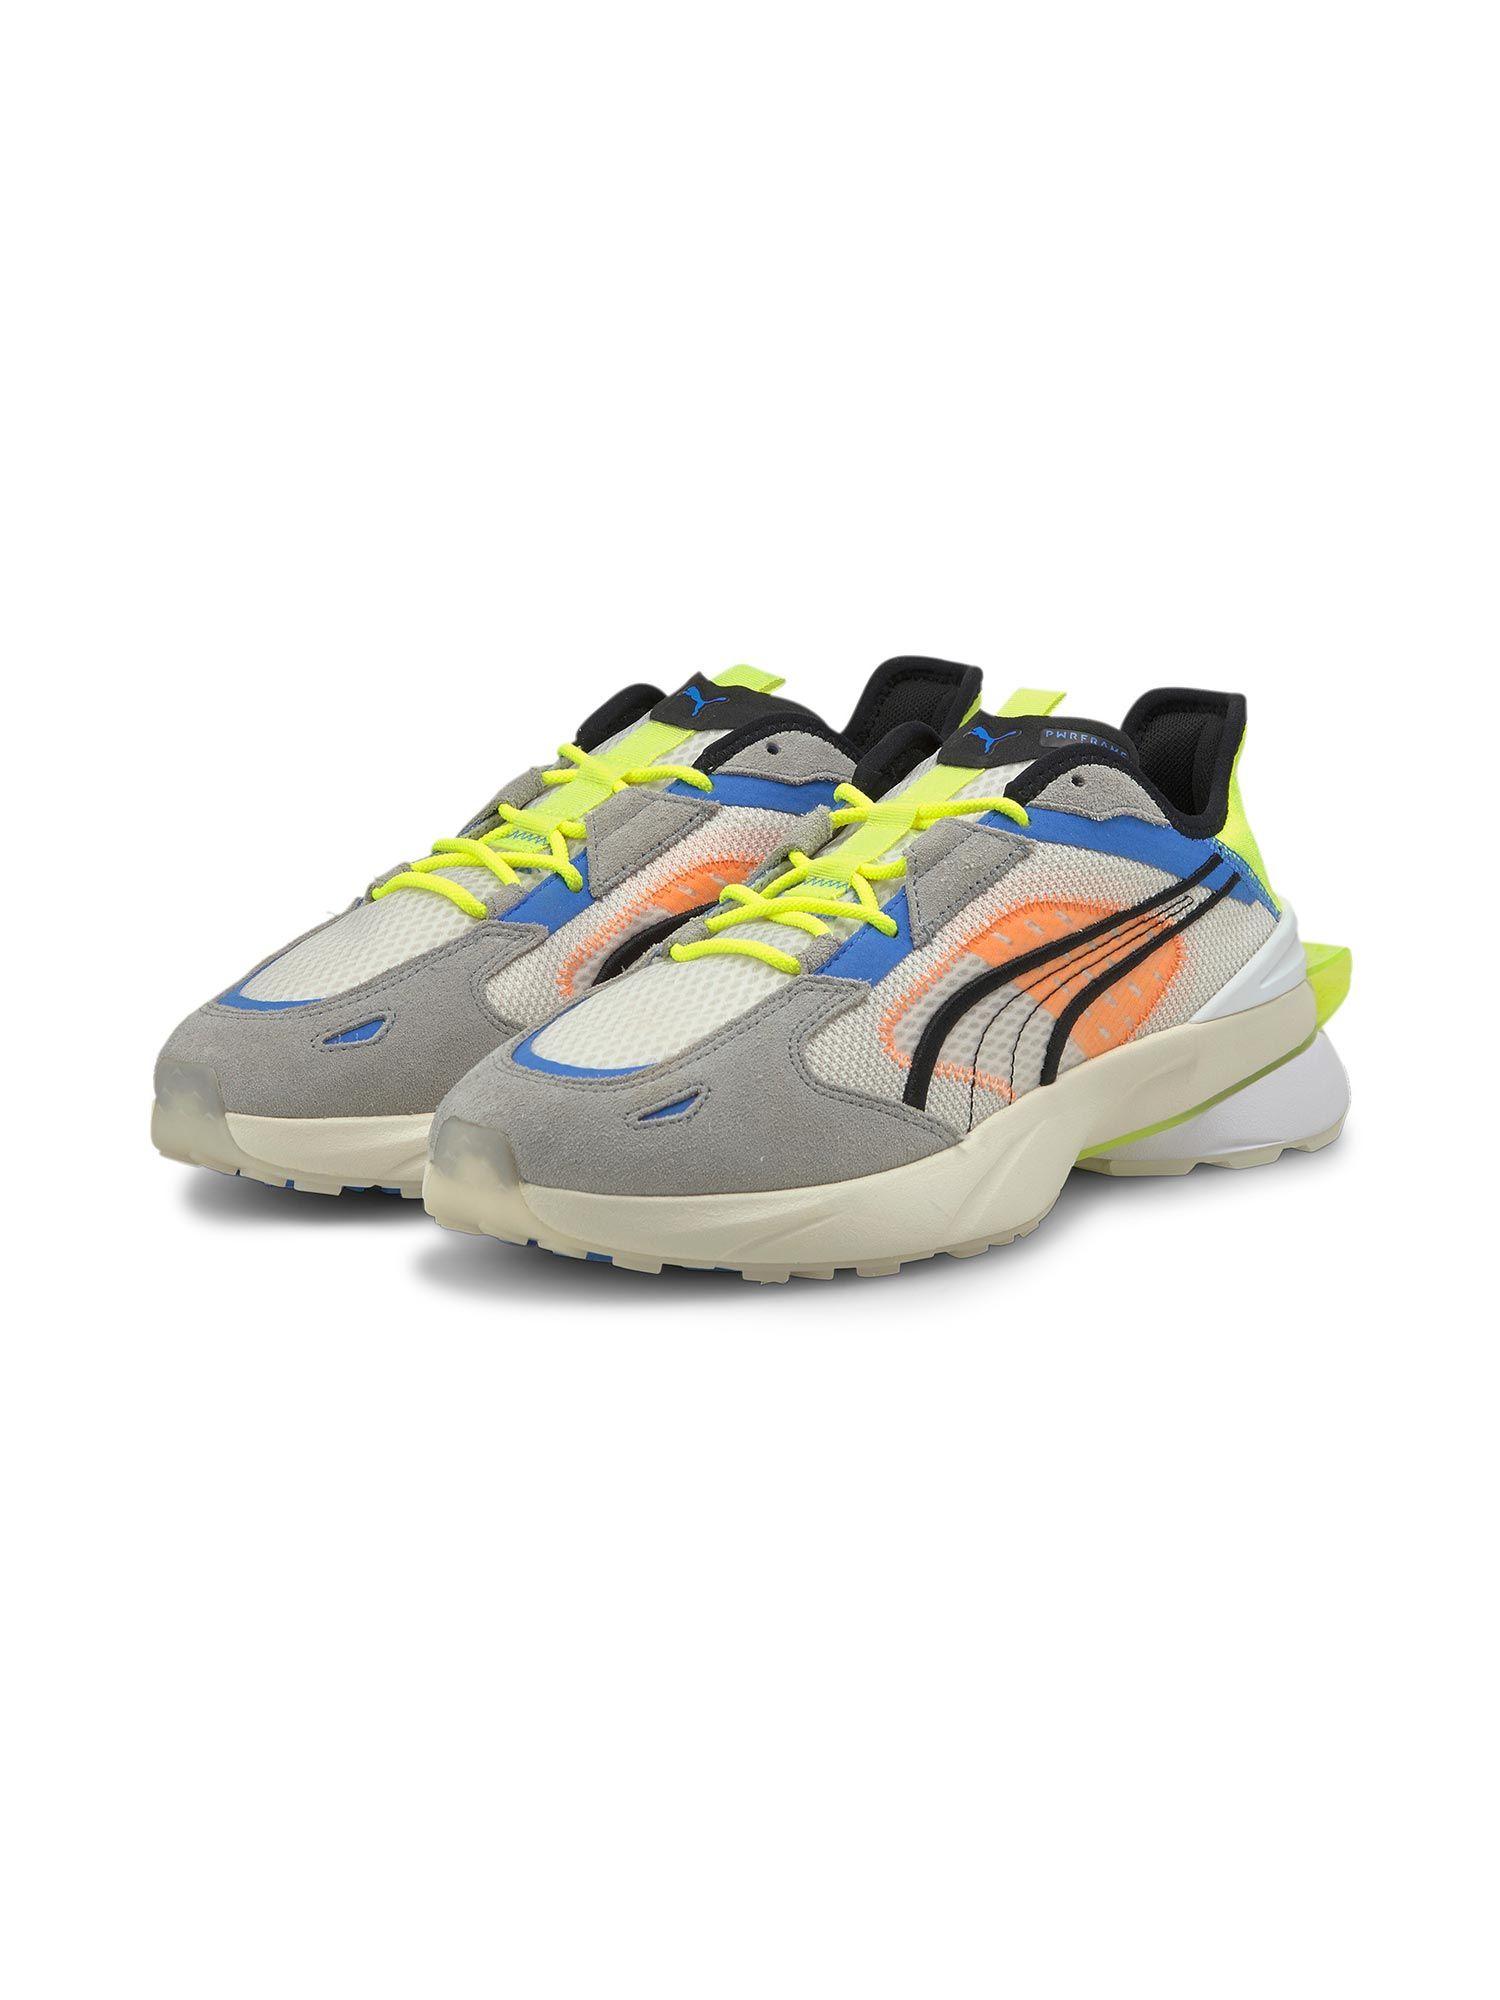 Pwrframe Op-1 Abstract Multi-Colour Unisex Casual Shoes